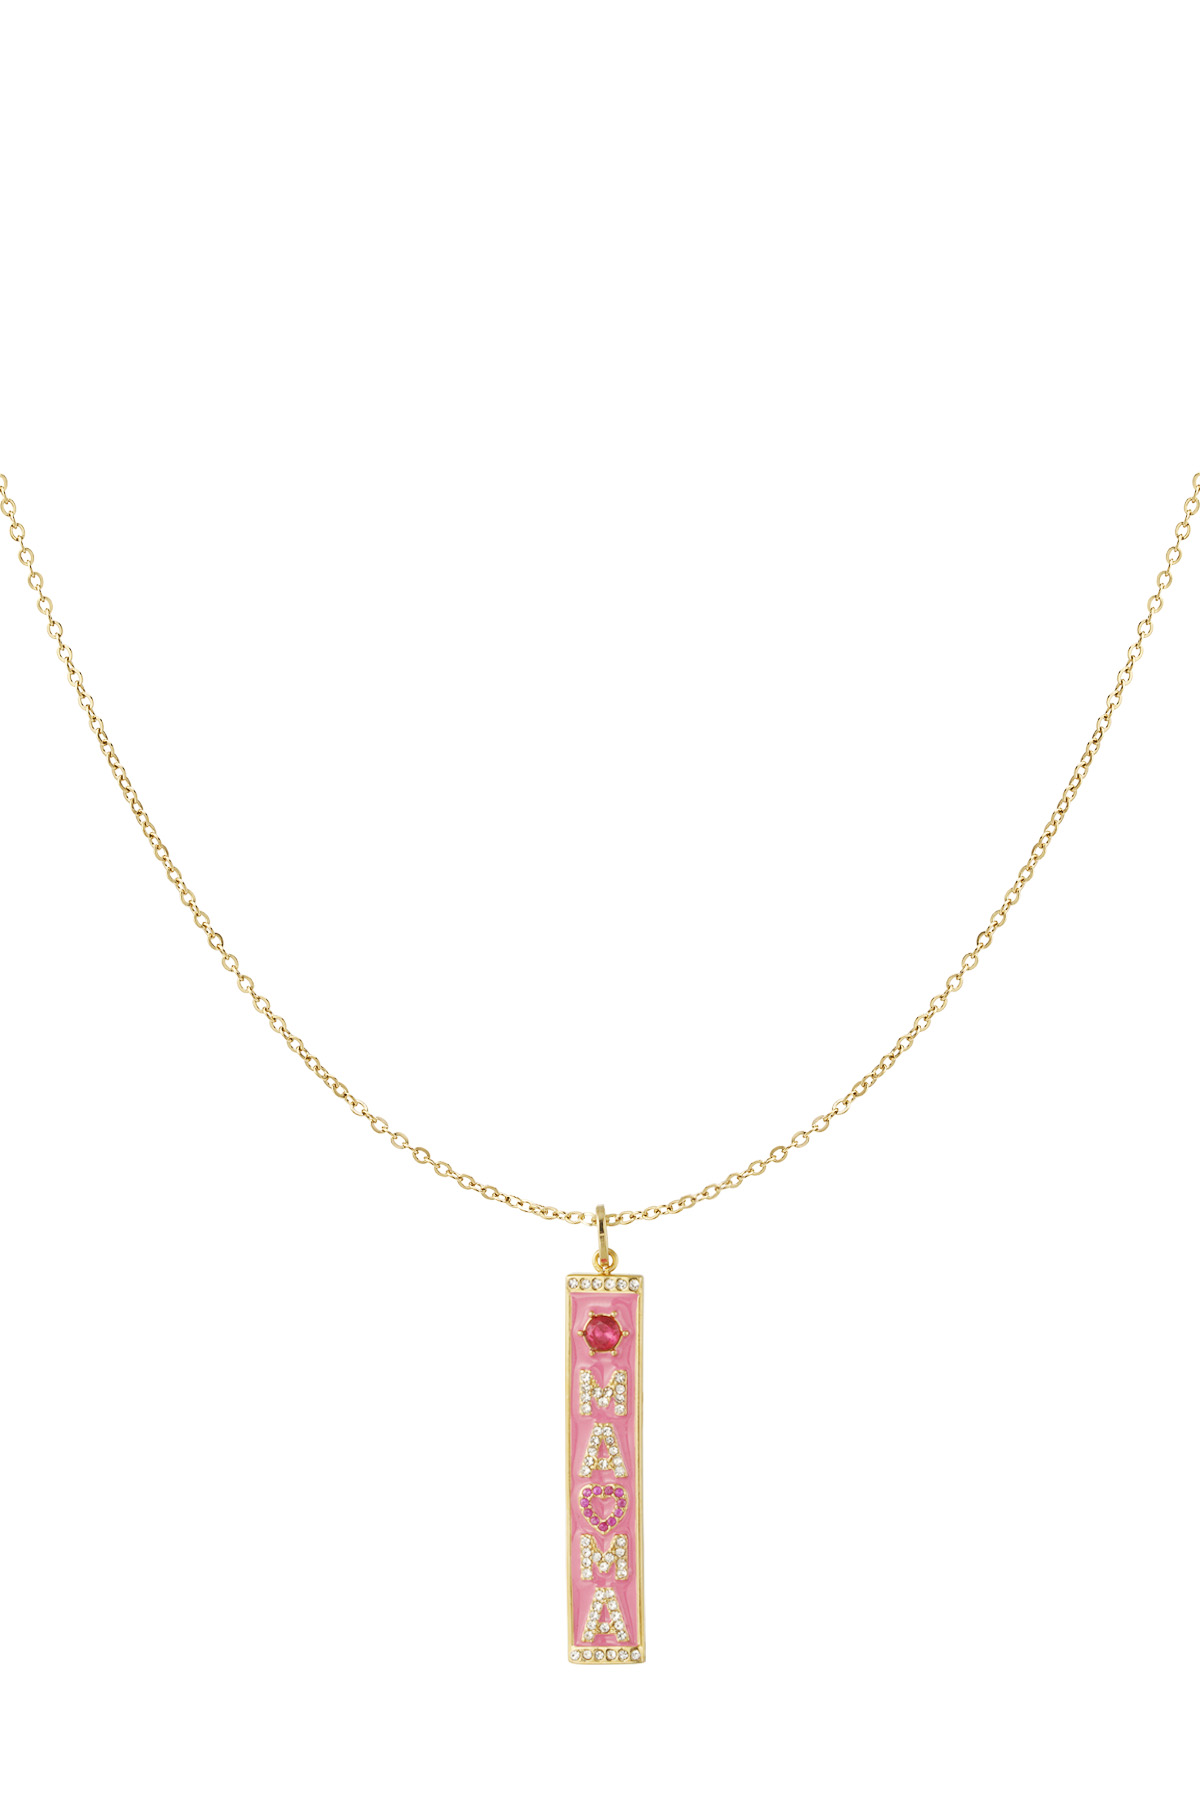 Necklace mama love - gold h5 